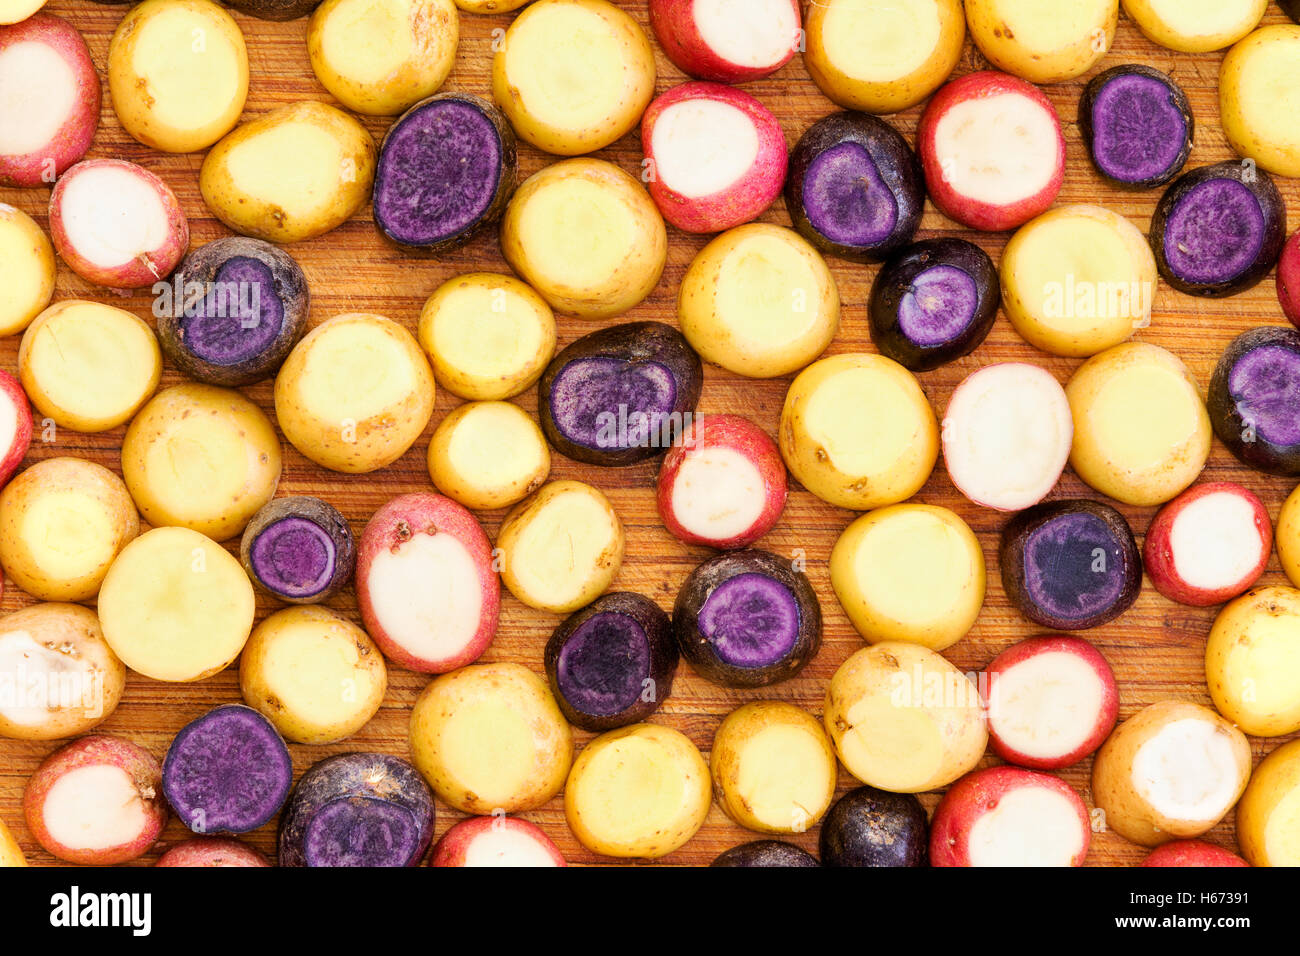 Full frame potato slice background in red, yellow and purple varieties on cutting board for concept about getting ready to roast Stock Photo